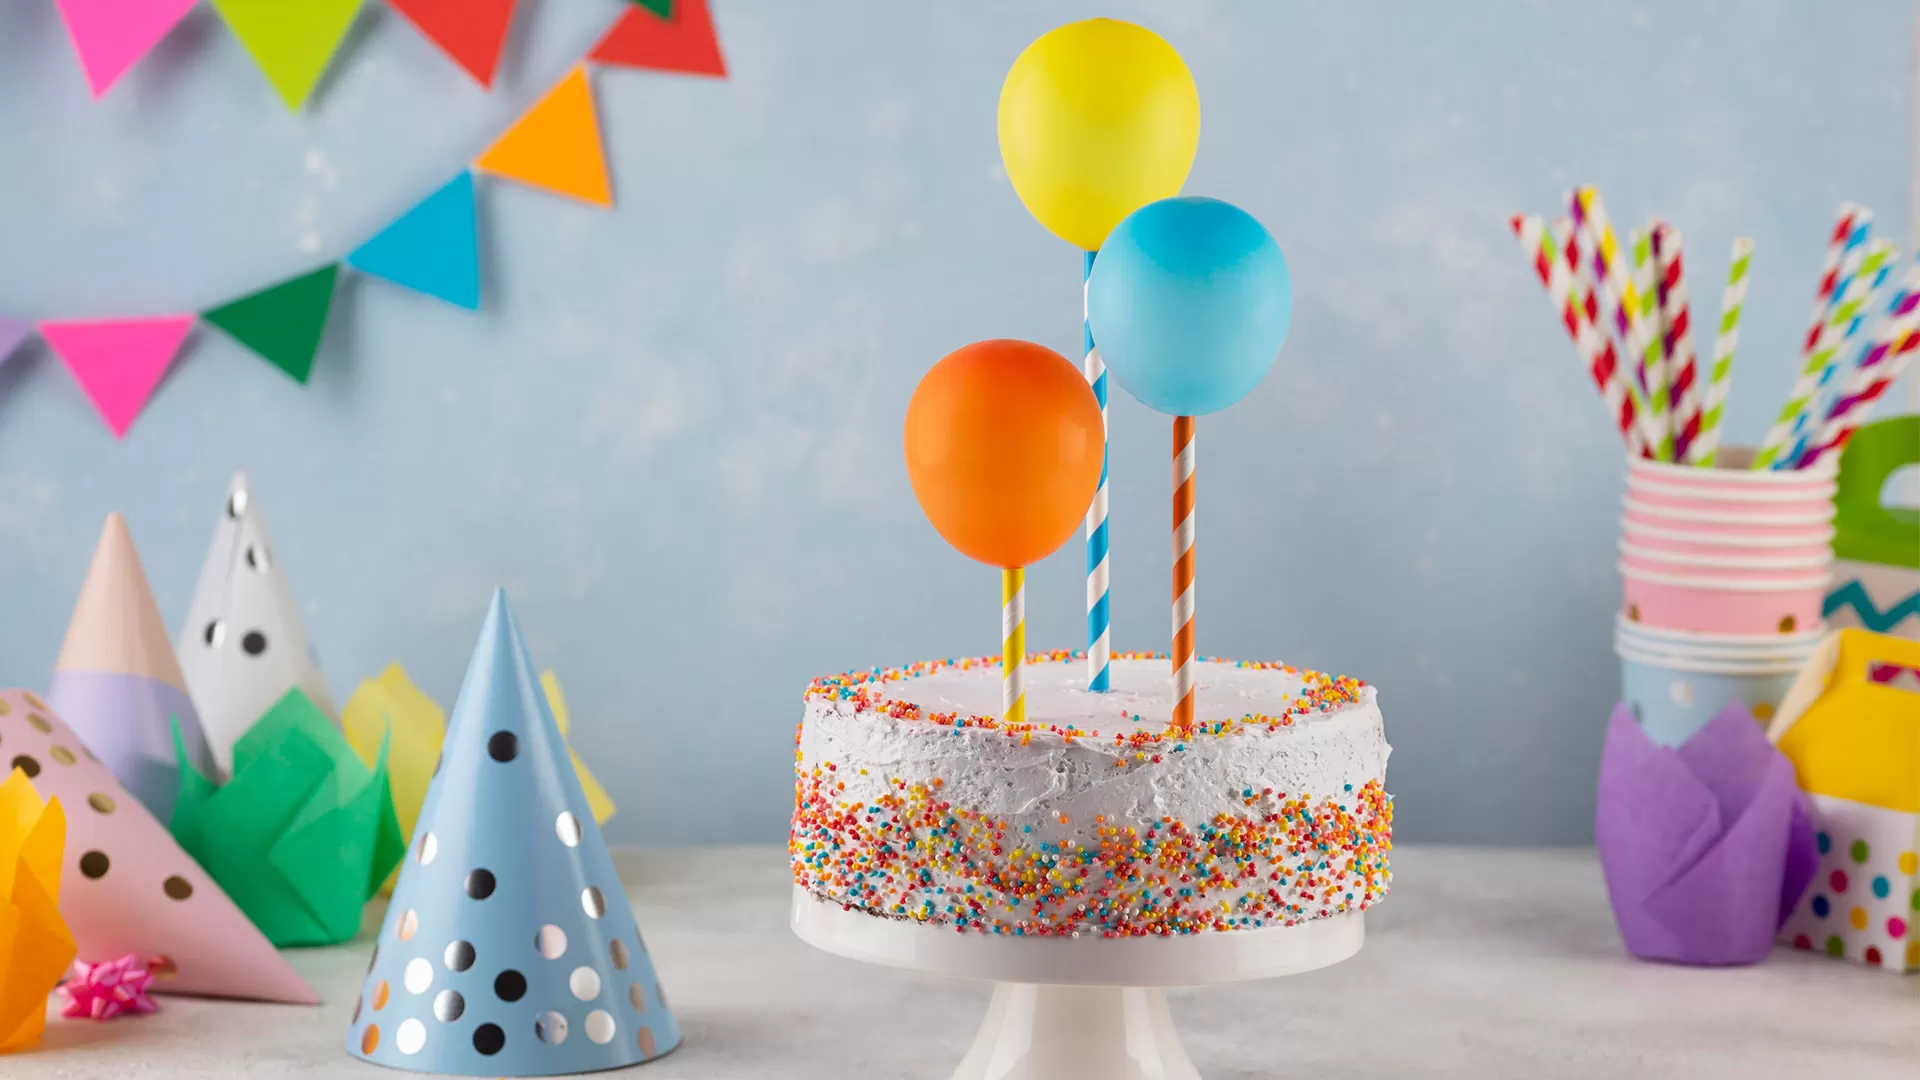 Event Planning: How to Start a Birthday Party Business - Shawano Leader